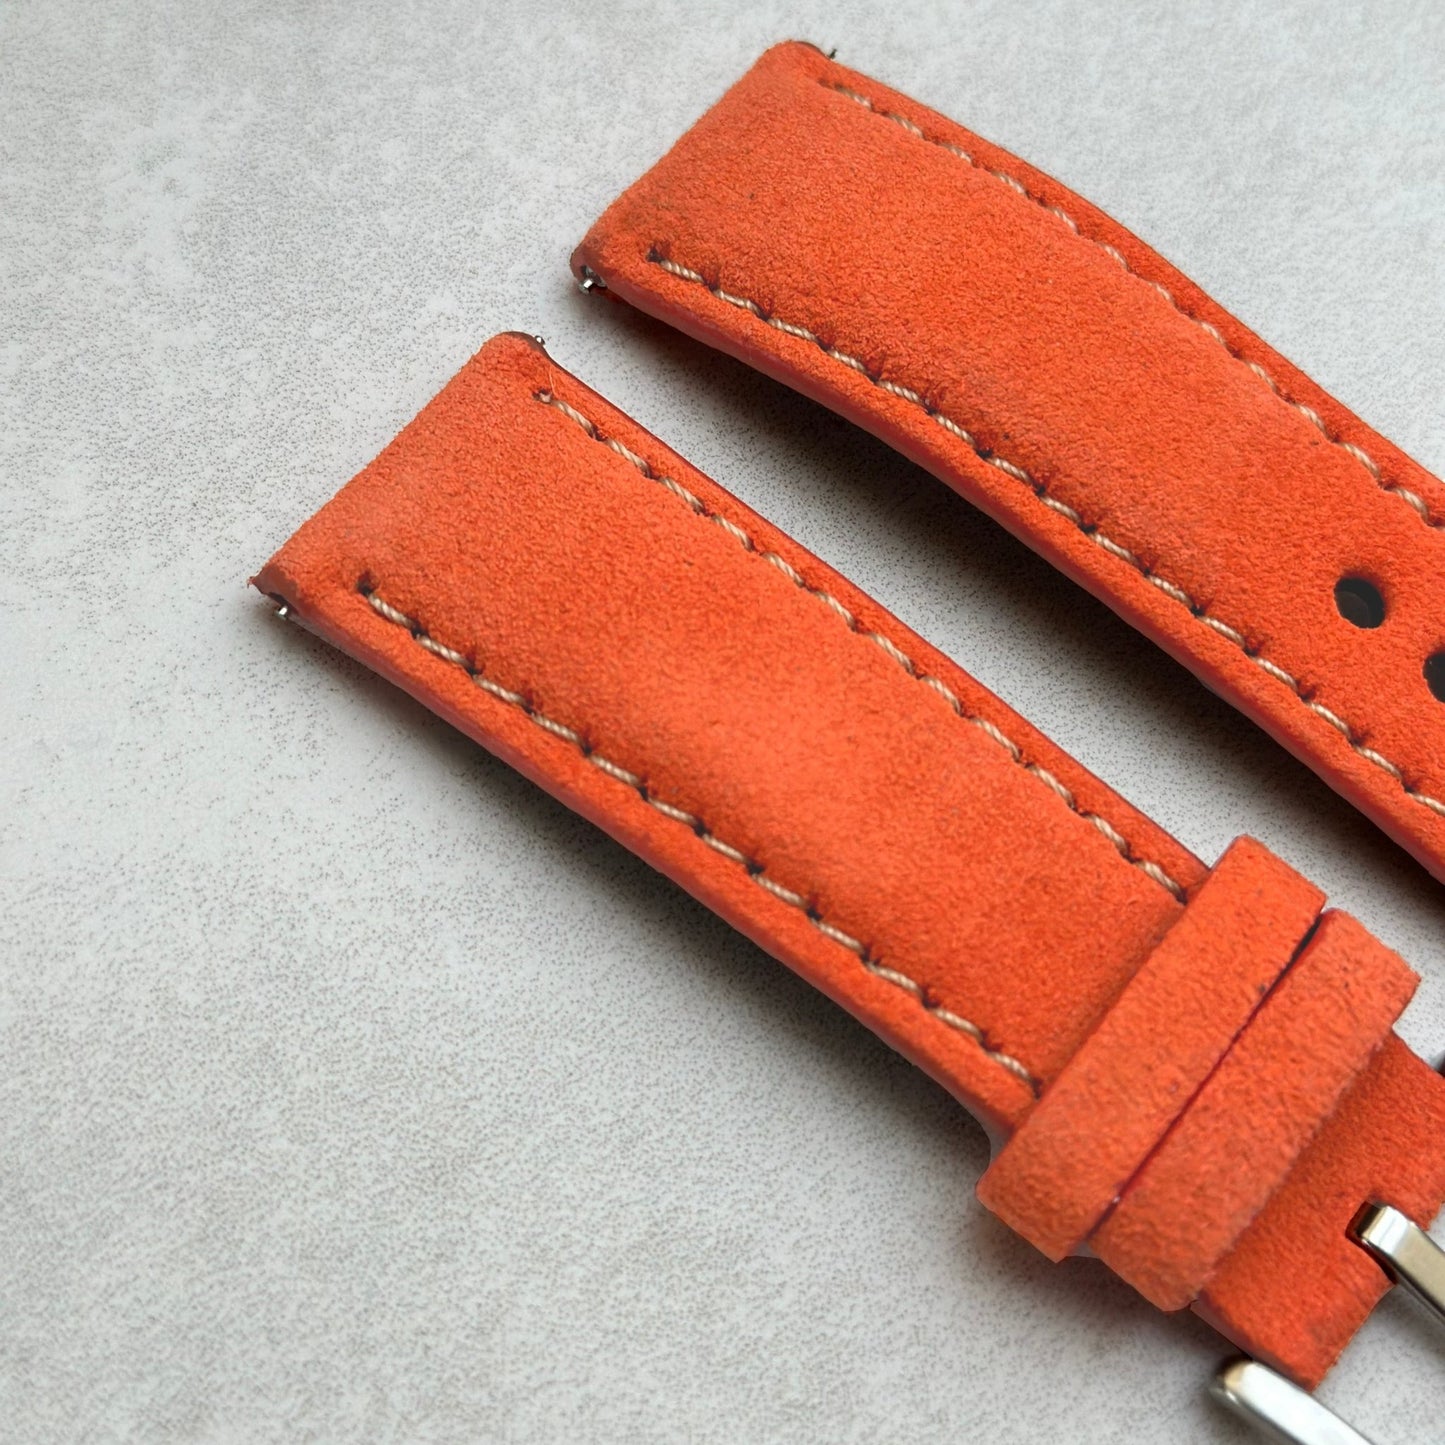 Top of the Paris orange suede watch strap. Padded watch strap. Ivory stitching. Watch And Strap.